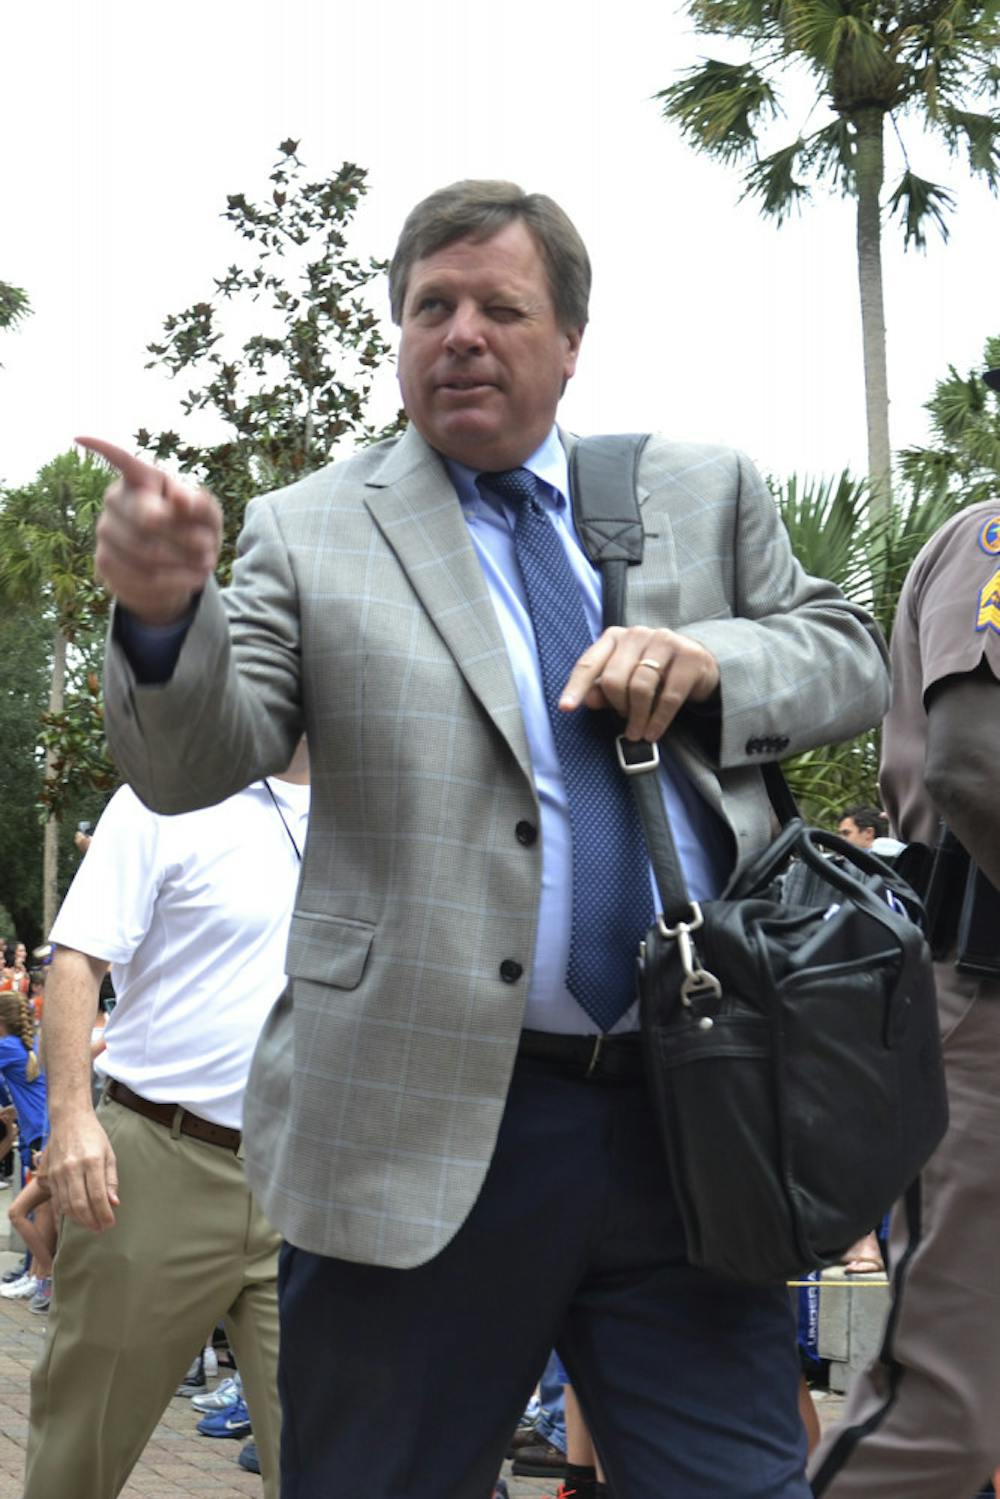 <p>UF coach Jim McElwain points to the crowd during Gator Walk prior to Florida's 20-14 overtime win against Florida Atlantic on Nov. 21, 2015.</p>